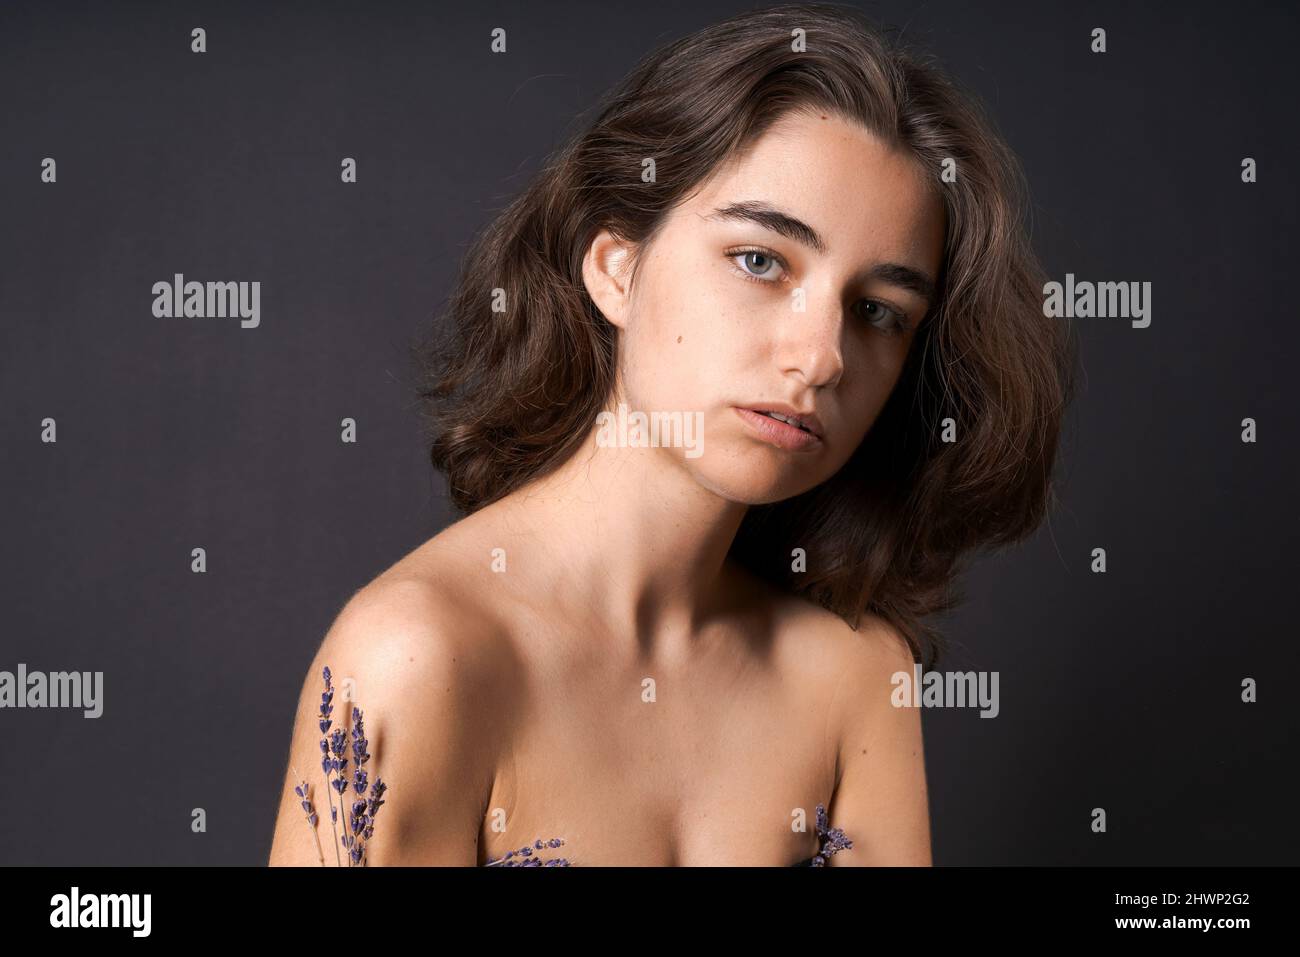 Unshaven armpit concept. Girl is holding lavender flowers in front her armpits. Symbol of unshaven body parts. Body positivity and naturalness. Problems home depilation on black background Stock Photo